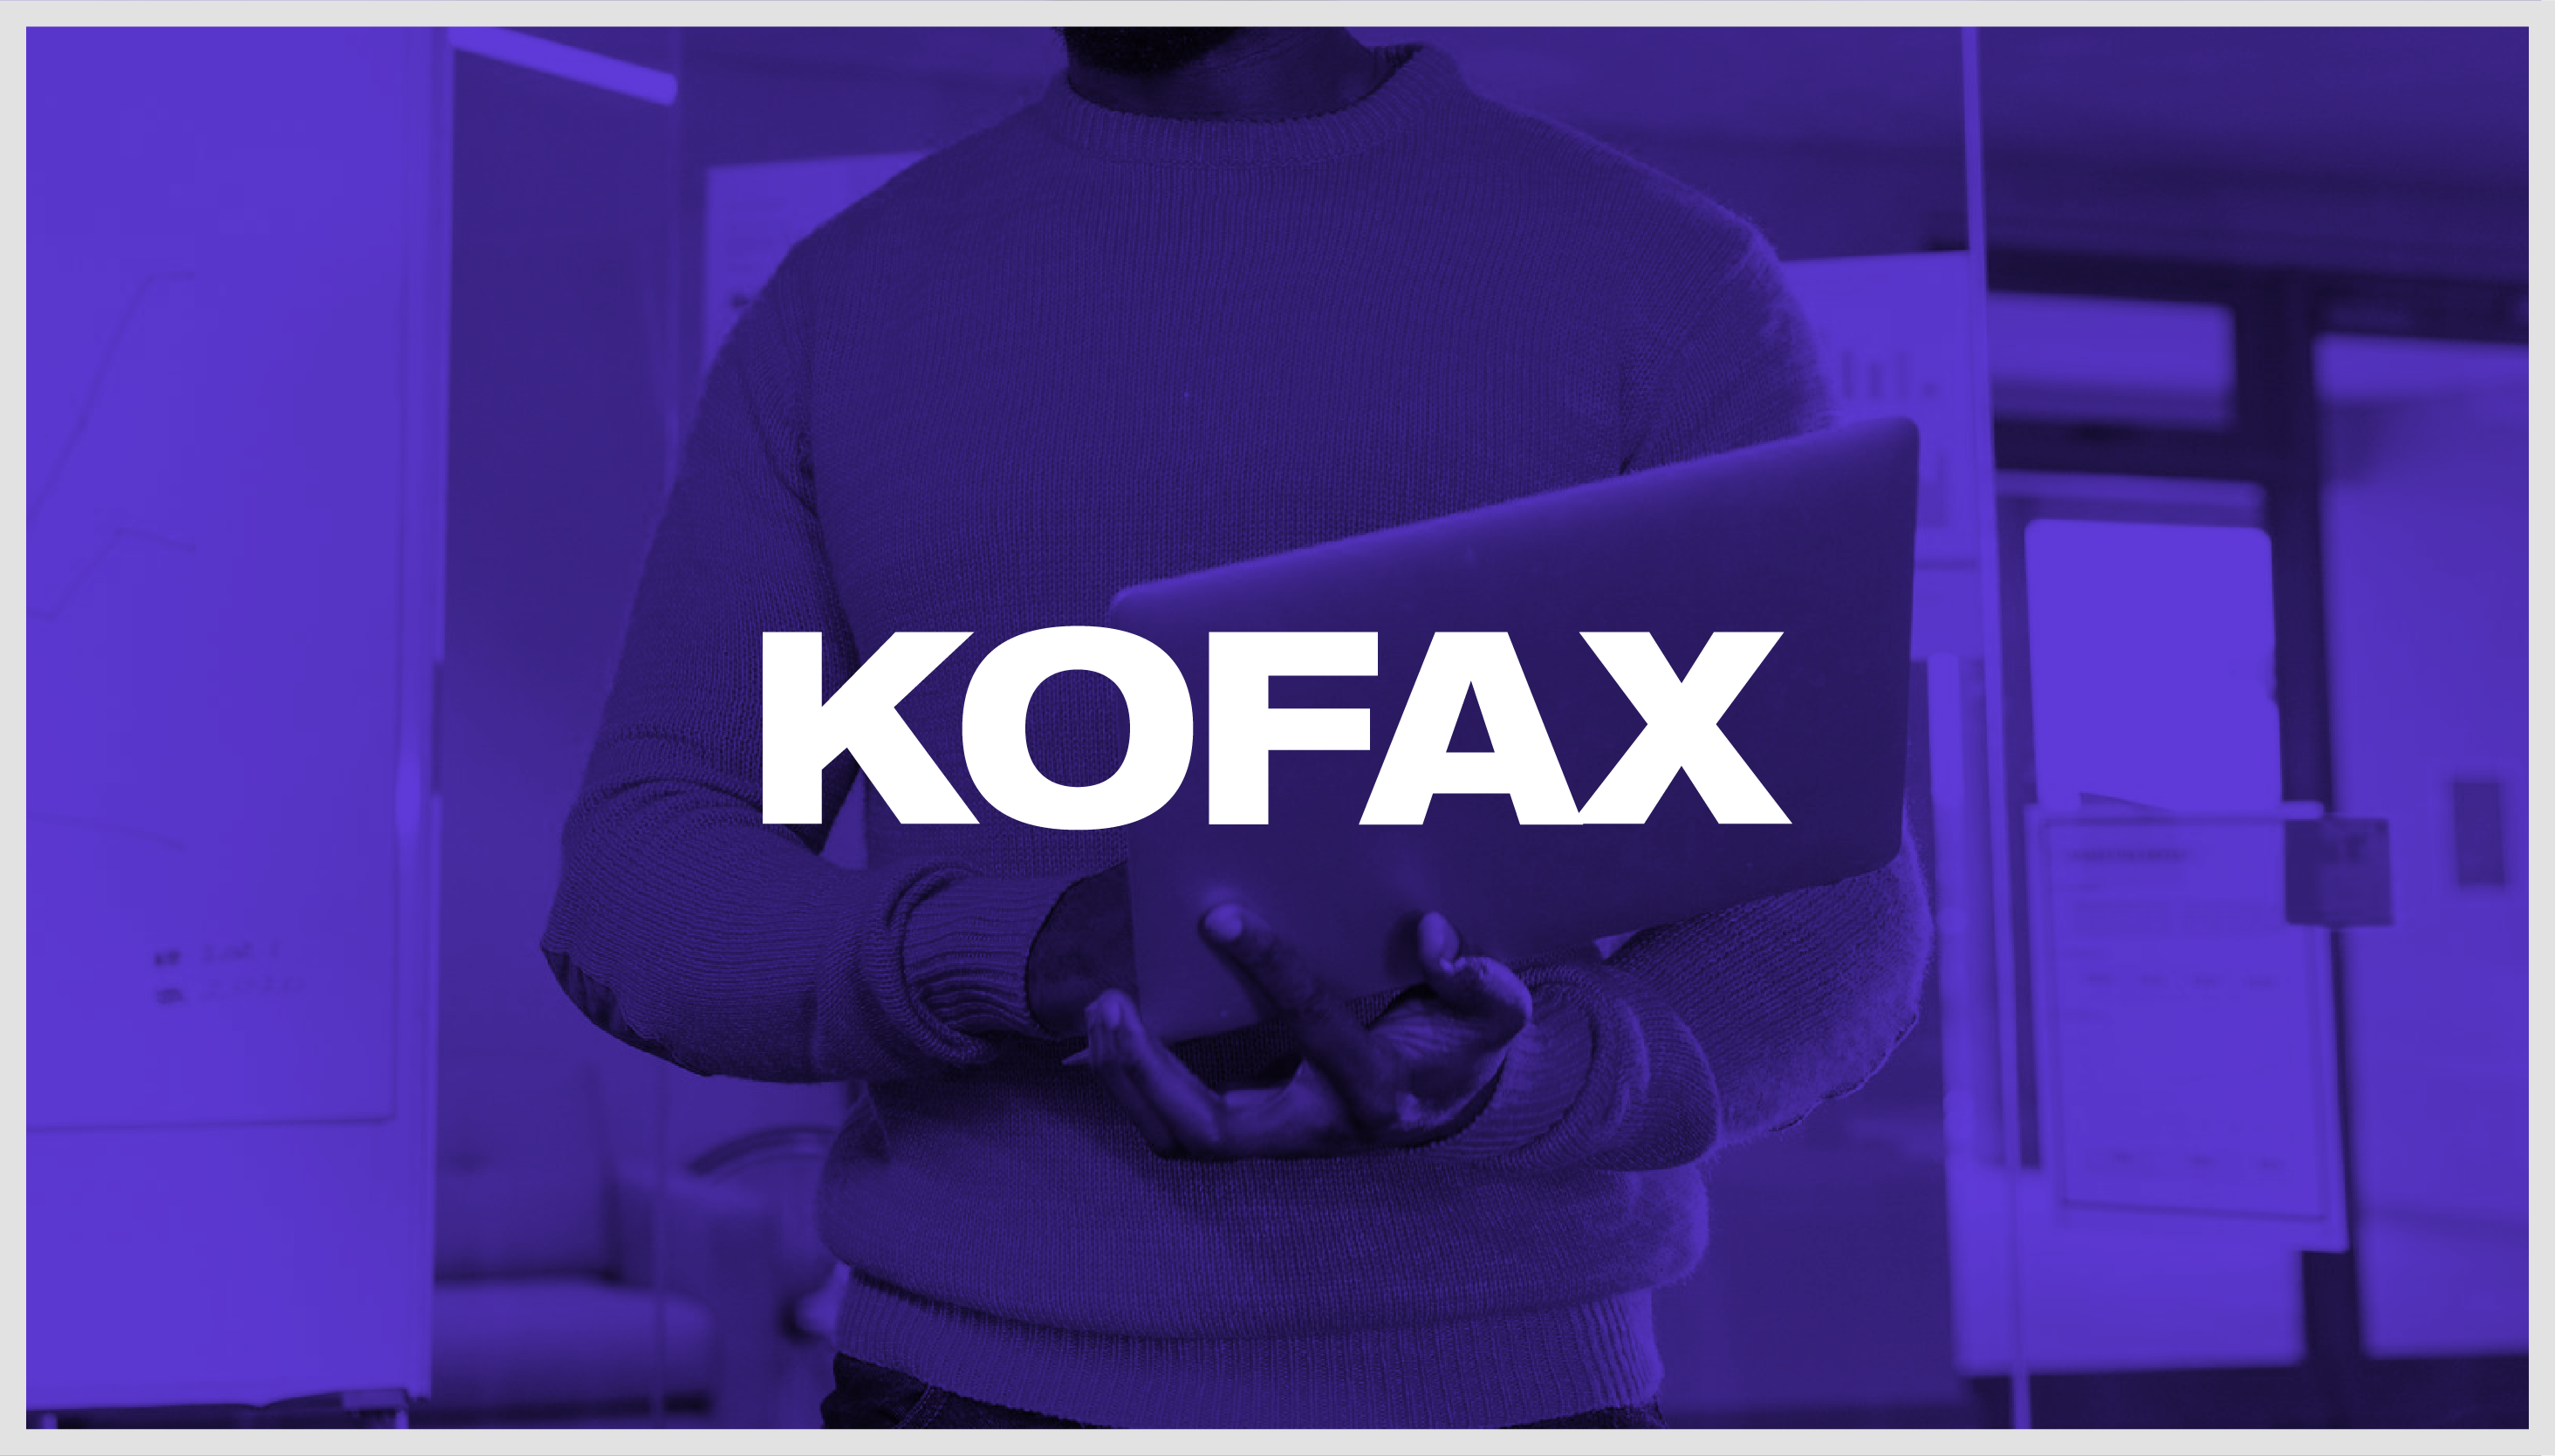 Kofax logo overlapping a photograph of a revenue leader holding a laptop